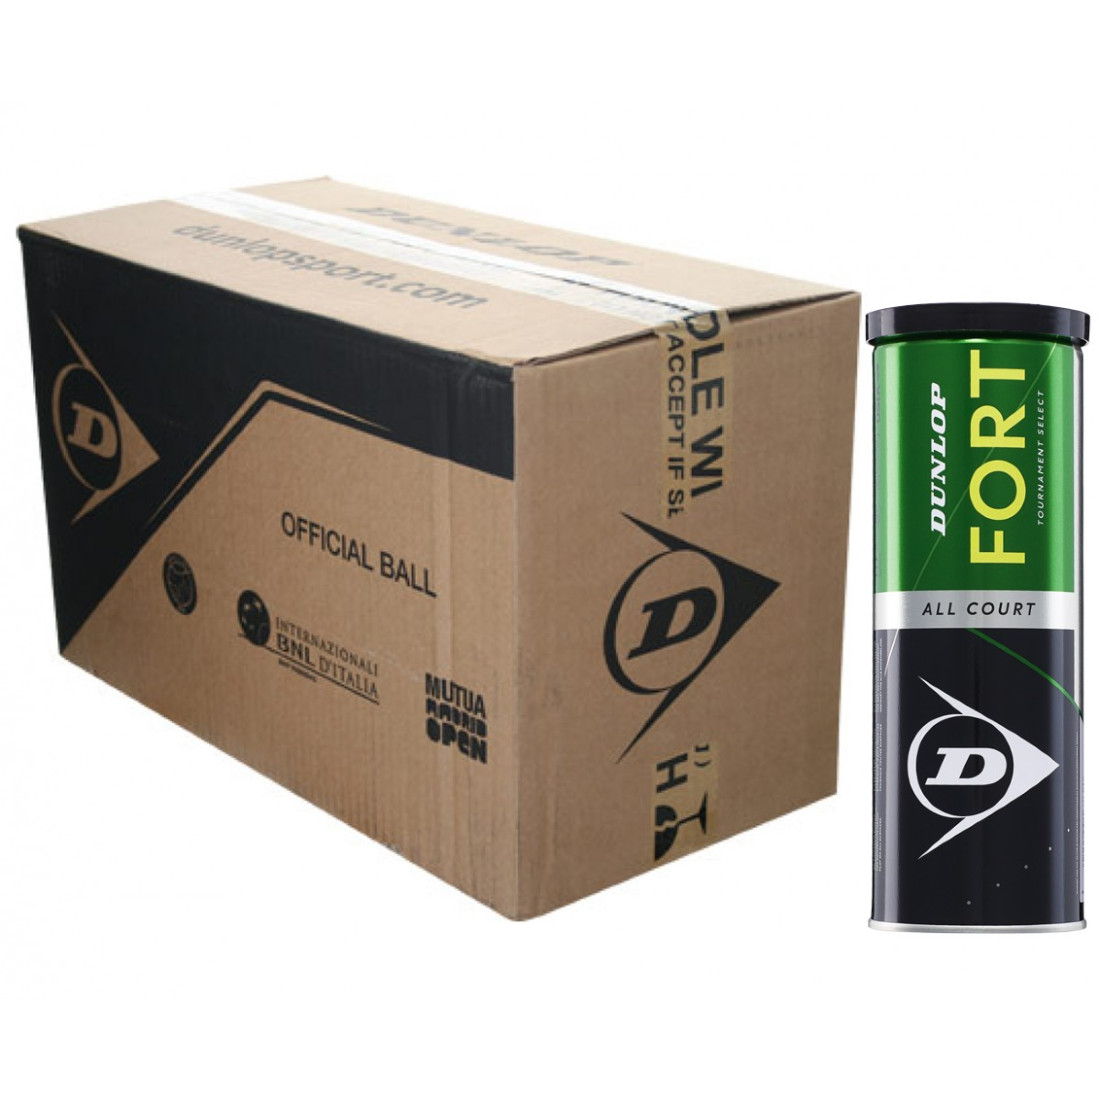 DUNLOP fort all court TS case of 24 cans 3 balls